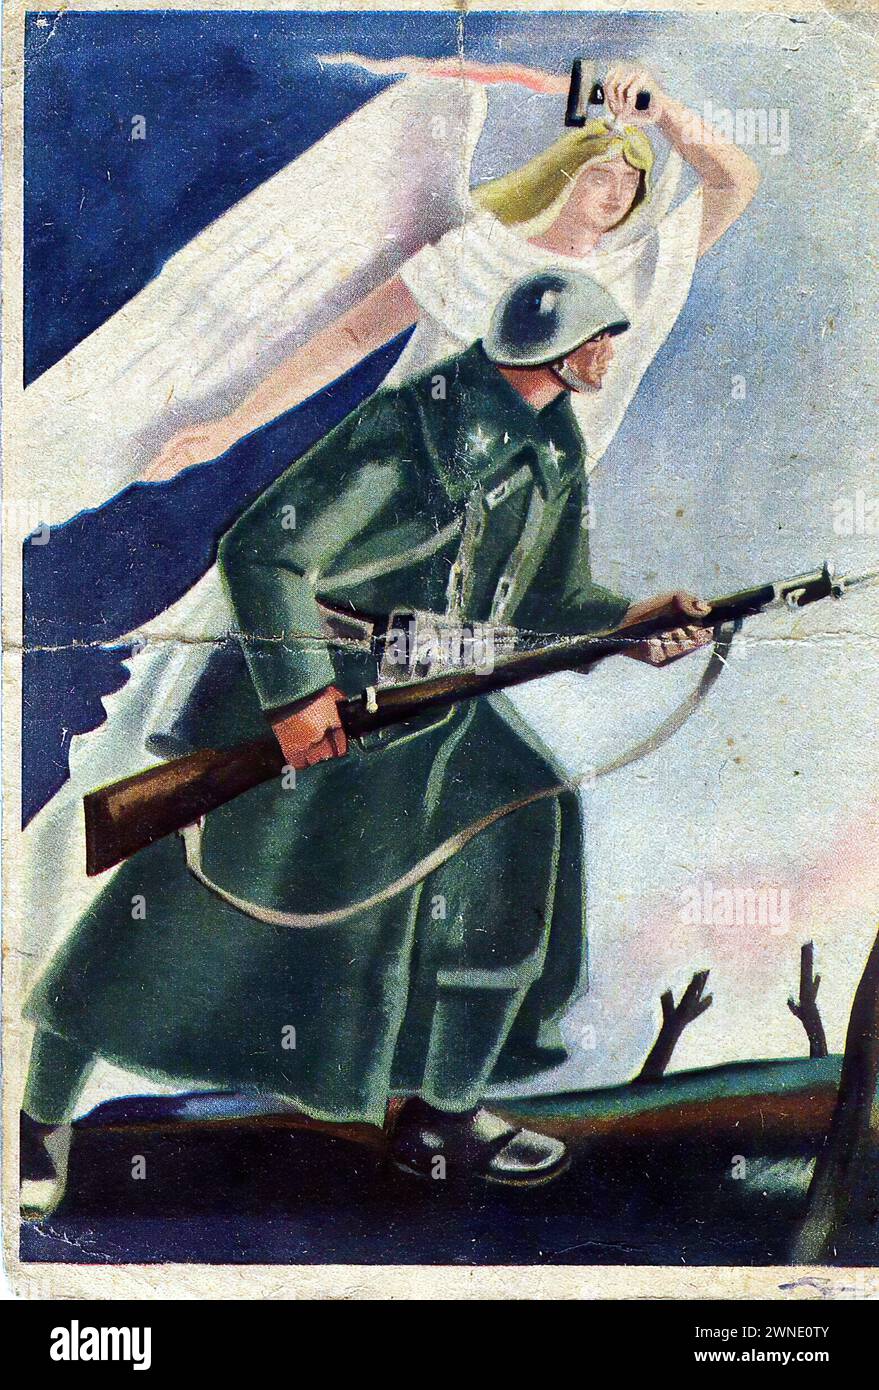 'LO' ['IT'] A World War II Italian propaganda card showing a soldier with an angelic figure above him, against a blue background with a white sword. The style is dramatic and heroic, with a focus on the patriotic and spiritual support for the soldier, indicative of wartime propaganda. Stock Photo